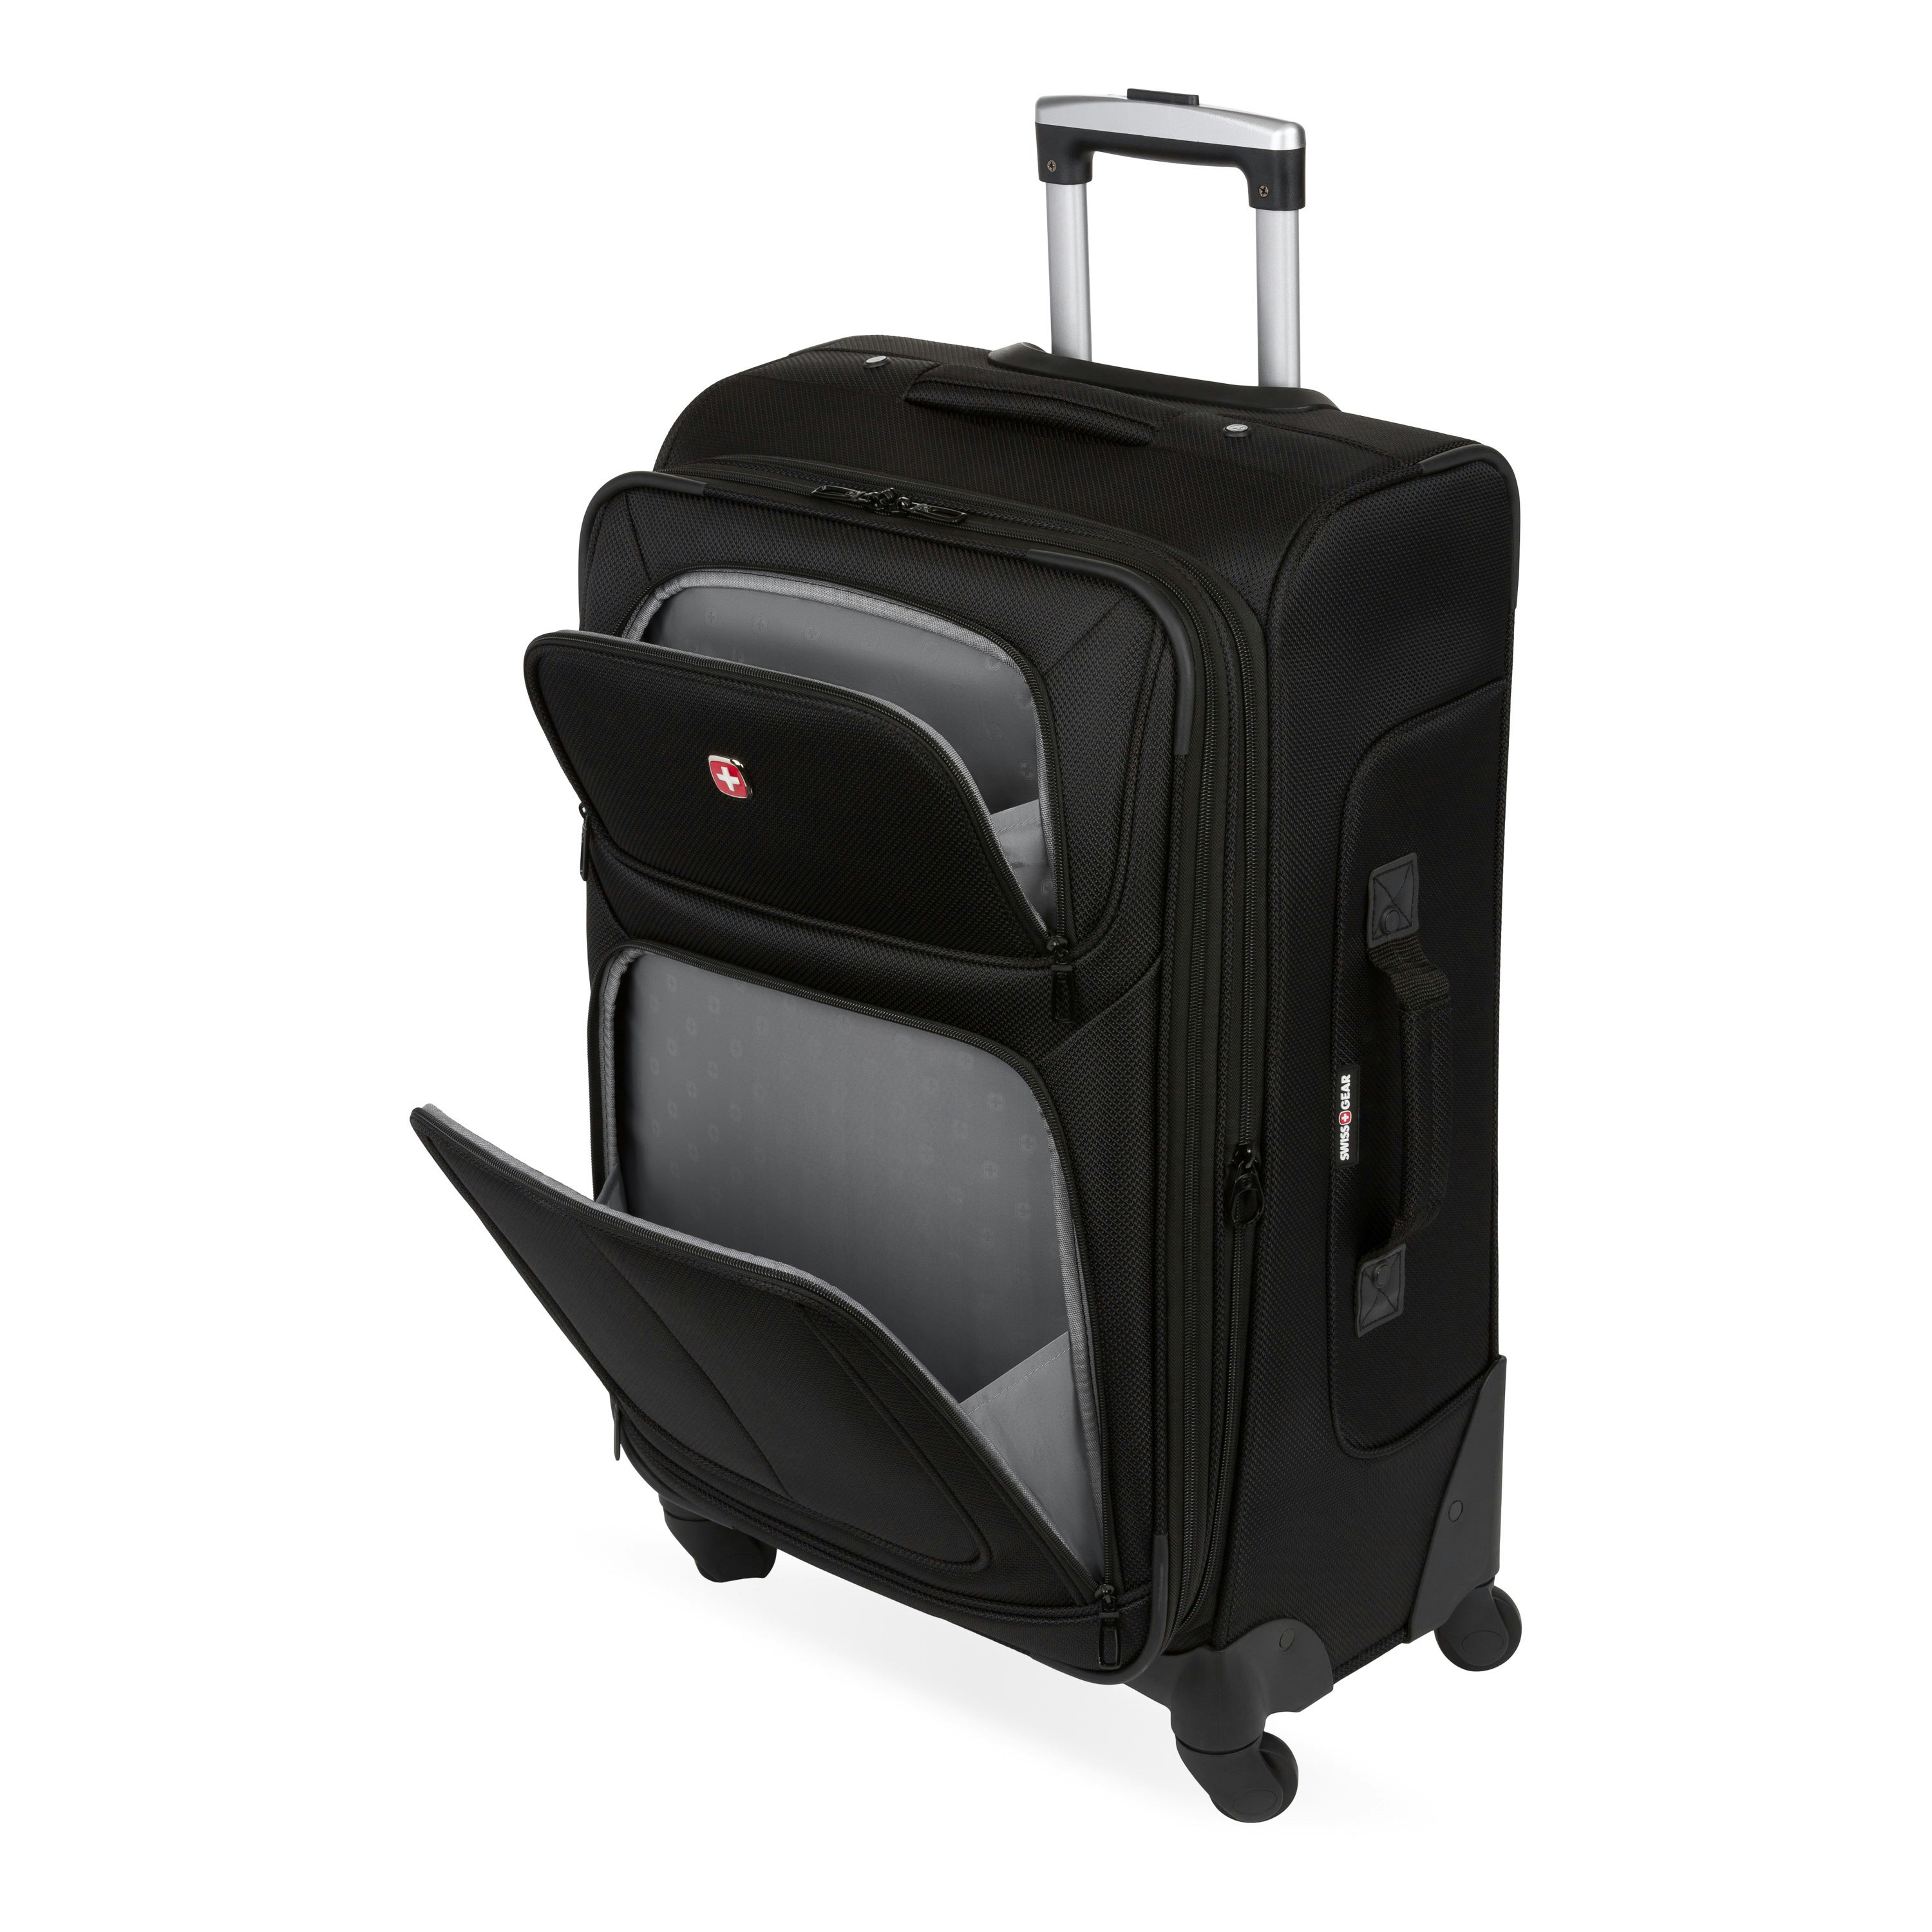 6283 Expandable Luggage with side carry handle